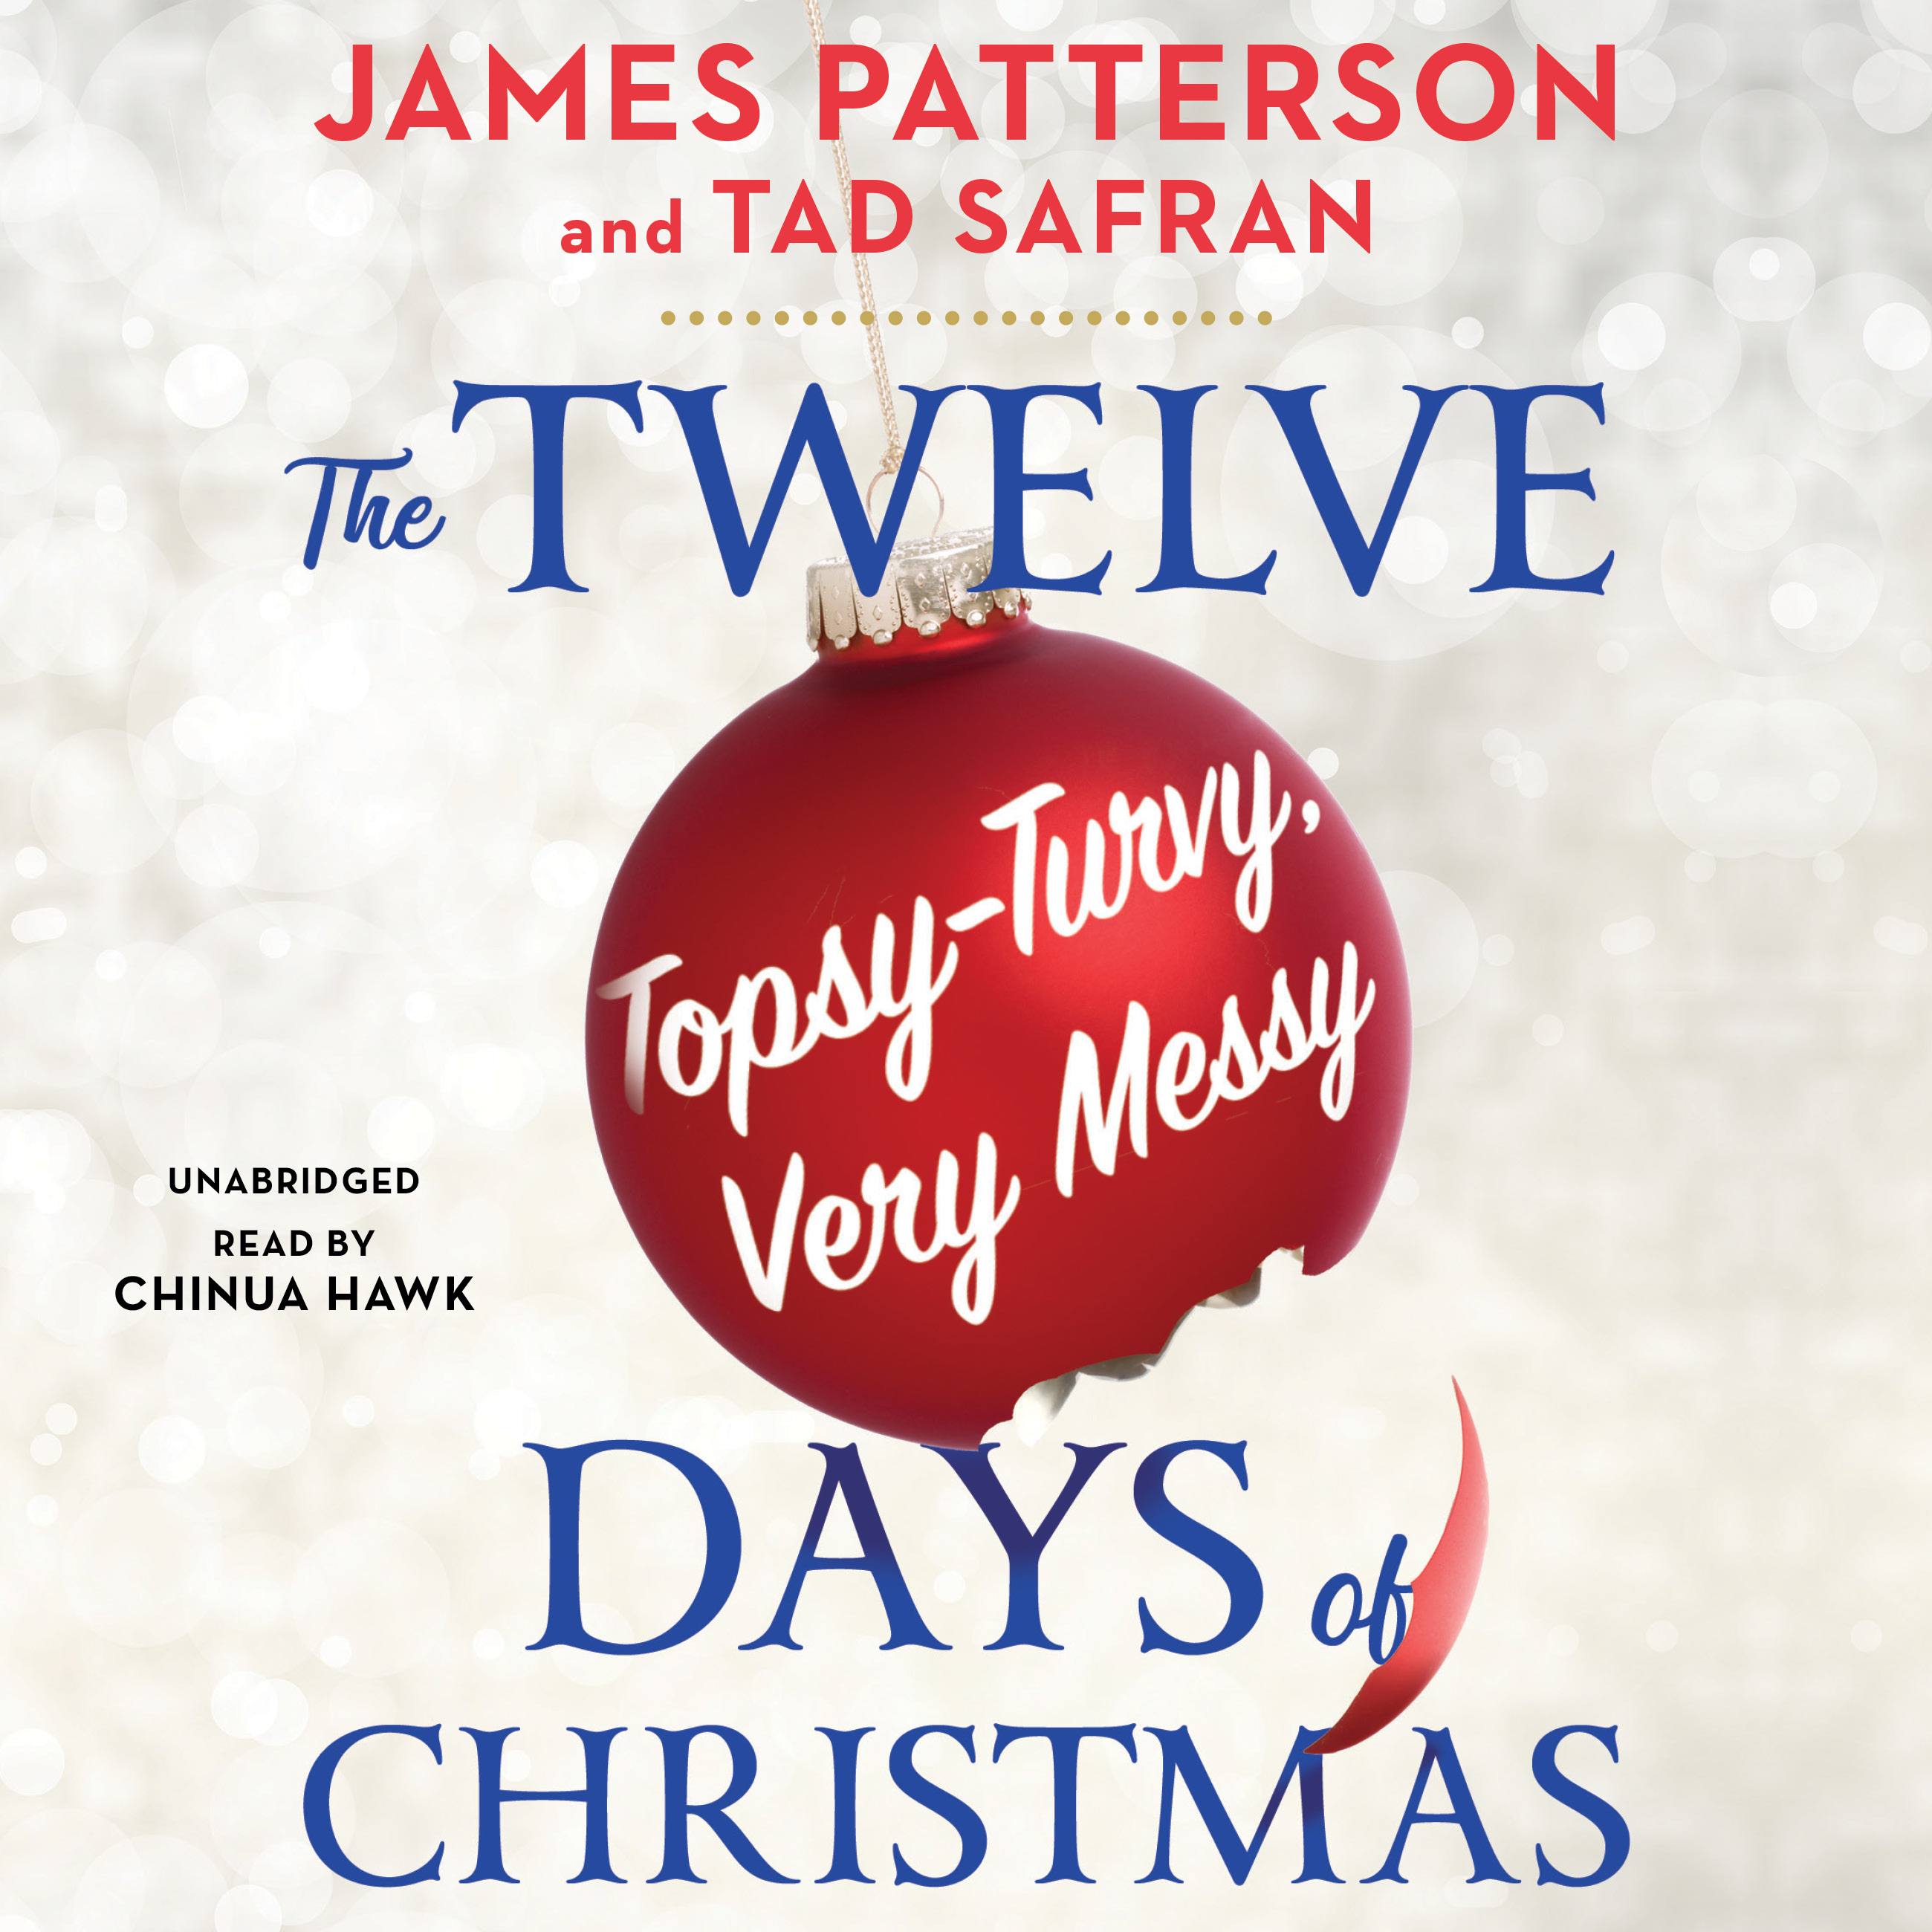 The Twelve Topsy-Turvy, Very Messy Days of Christmas by James Patterson |  Little, Brown and Company